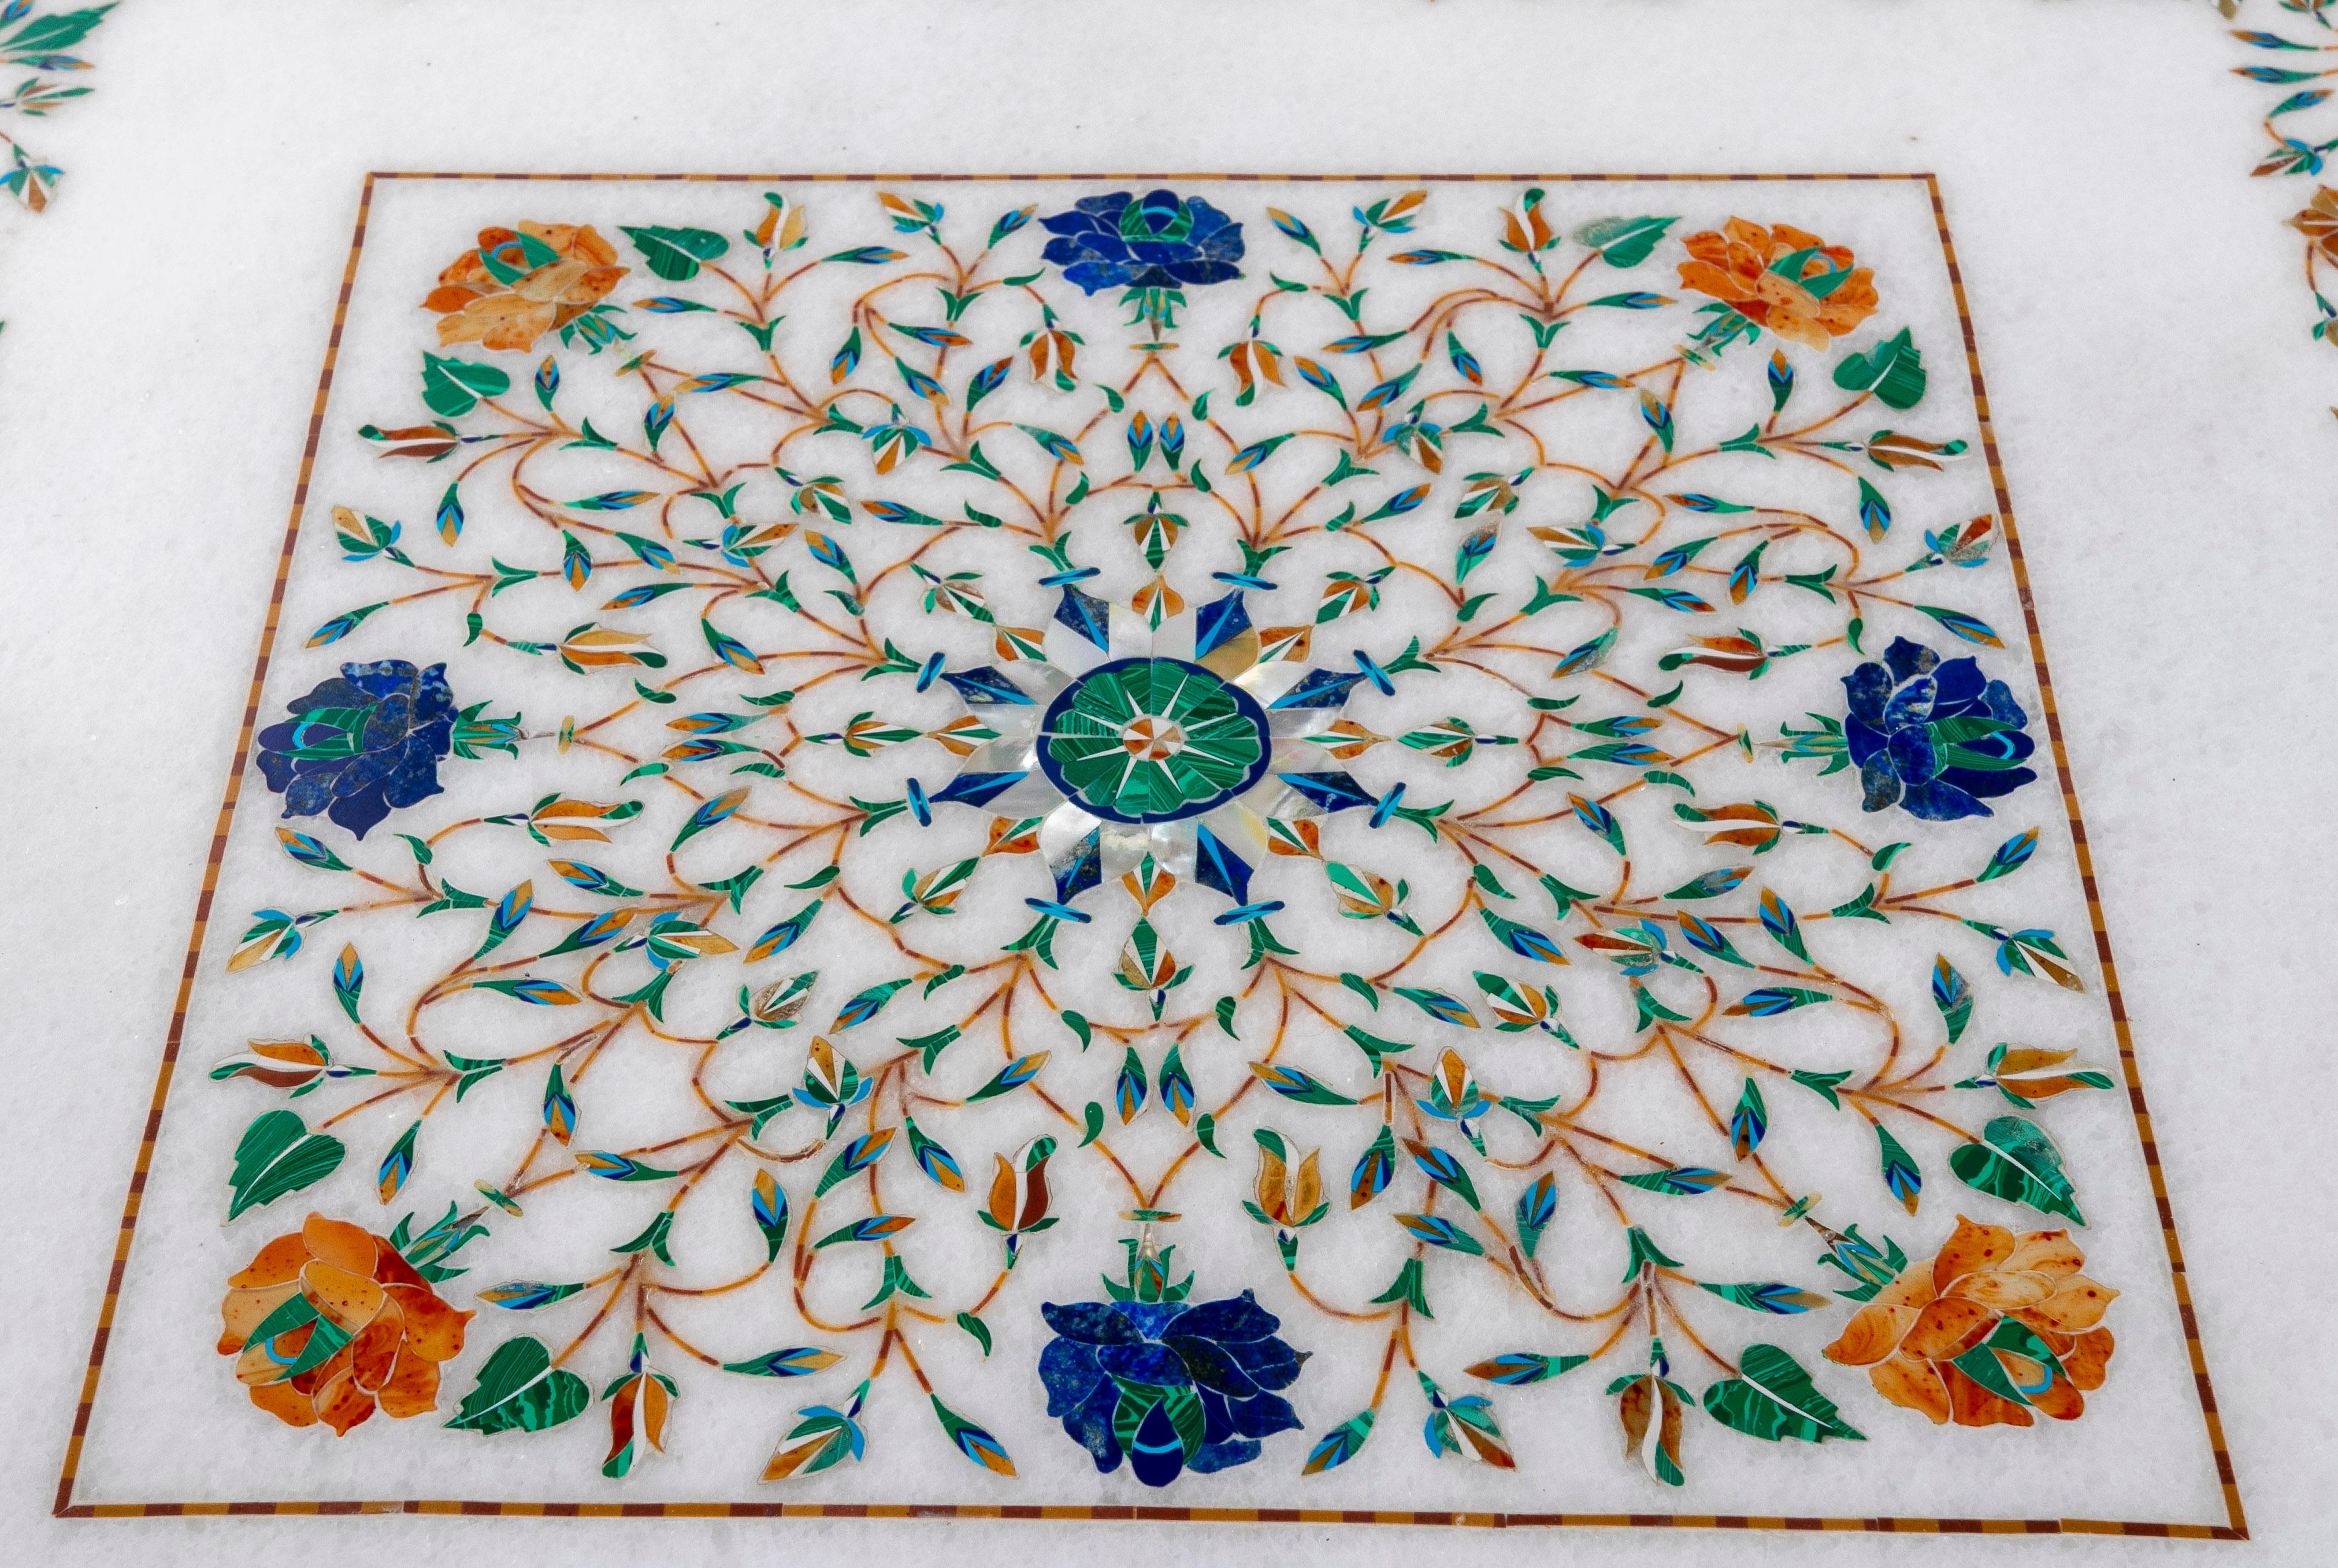 1990s European Pietra Dura Mosaic Inlay White Marble Square Table Top For Sale 10